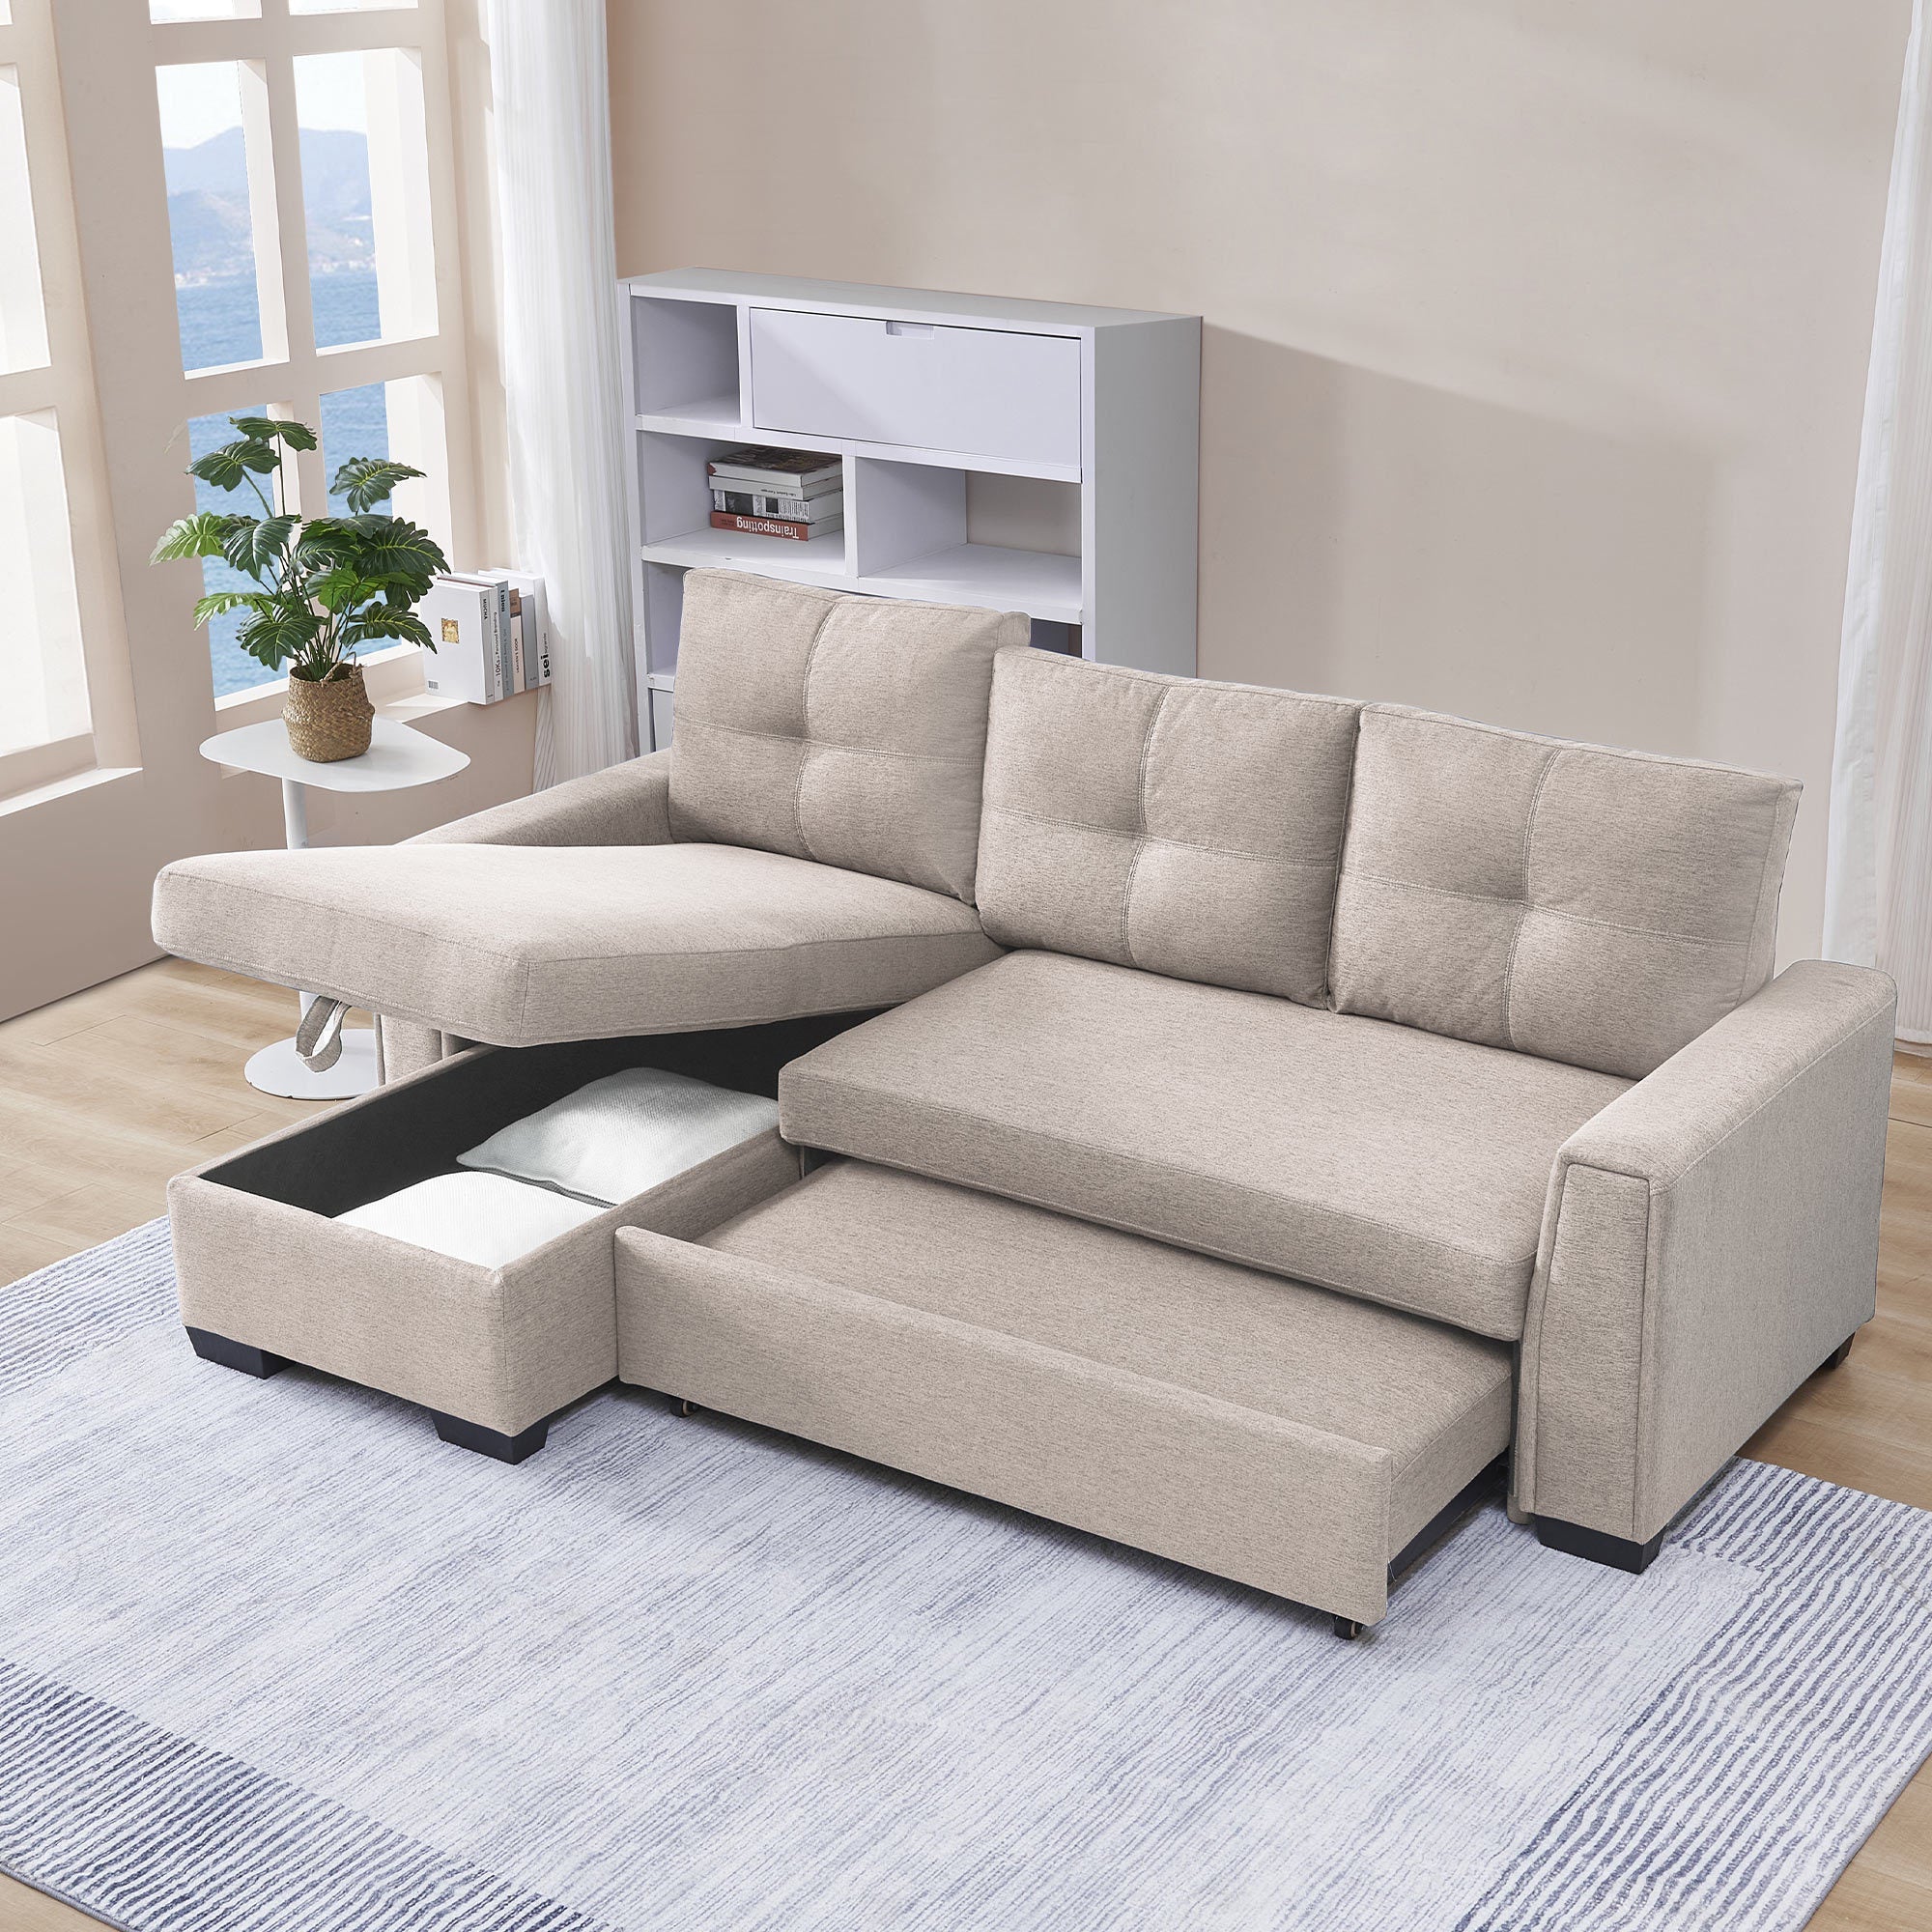 91.7" L-Shape Sleeper Sectional Sofa w/Storage Chaise - Beige Fabric Modular Couch-Sleeper Sectionals-American Furniture Outlet